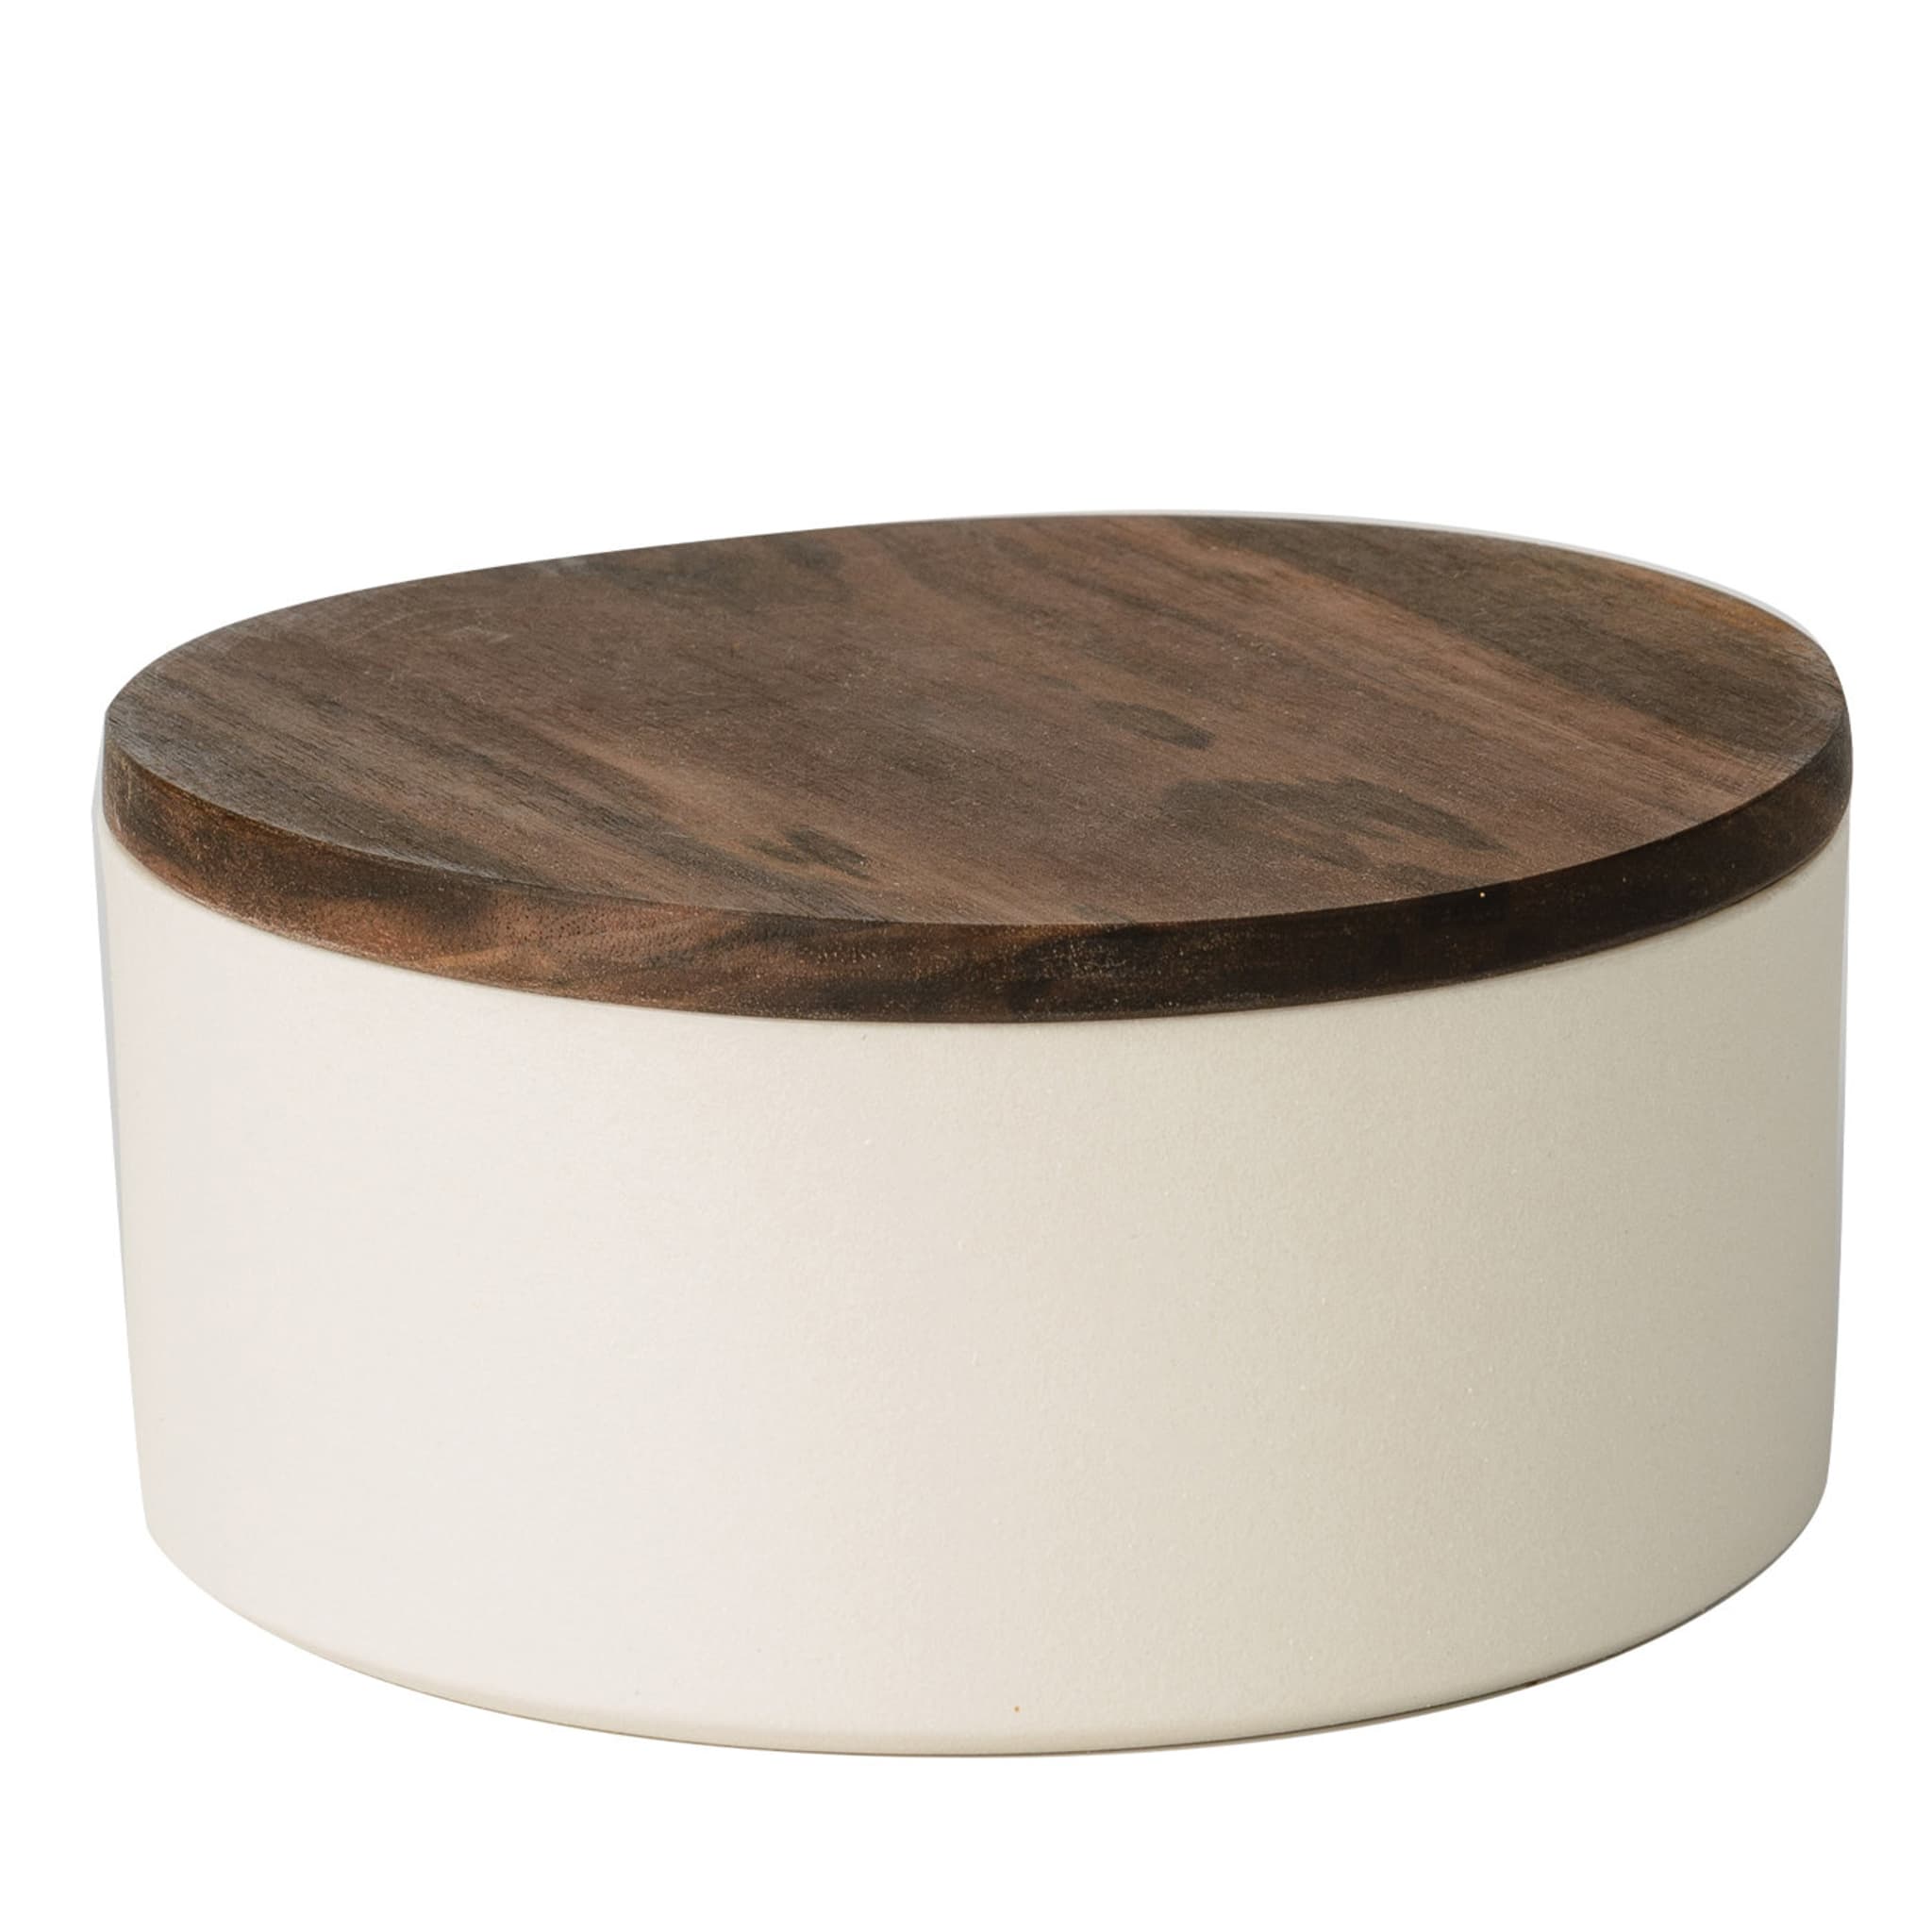 Small Round Ceramic Container with Wooden Lid - Main view